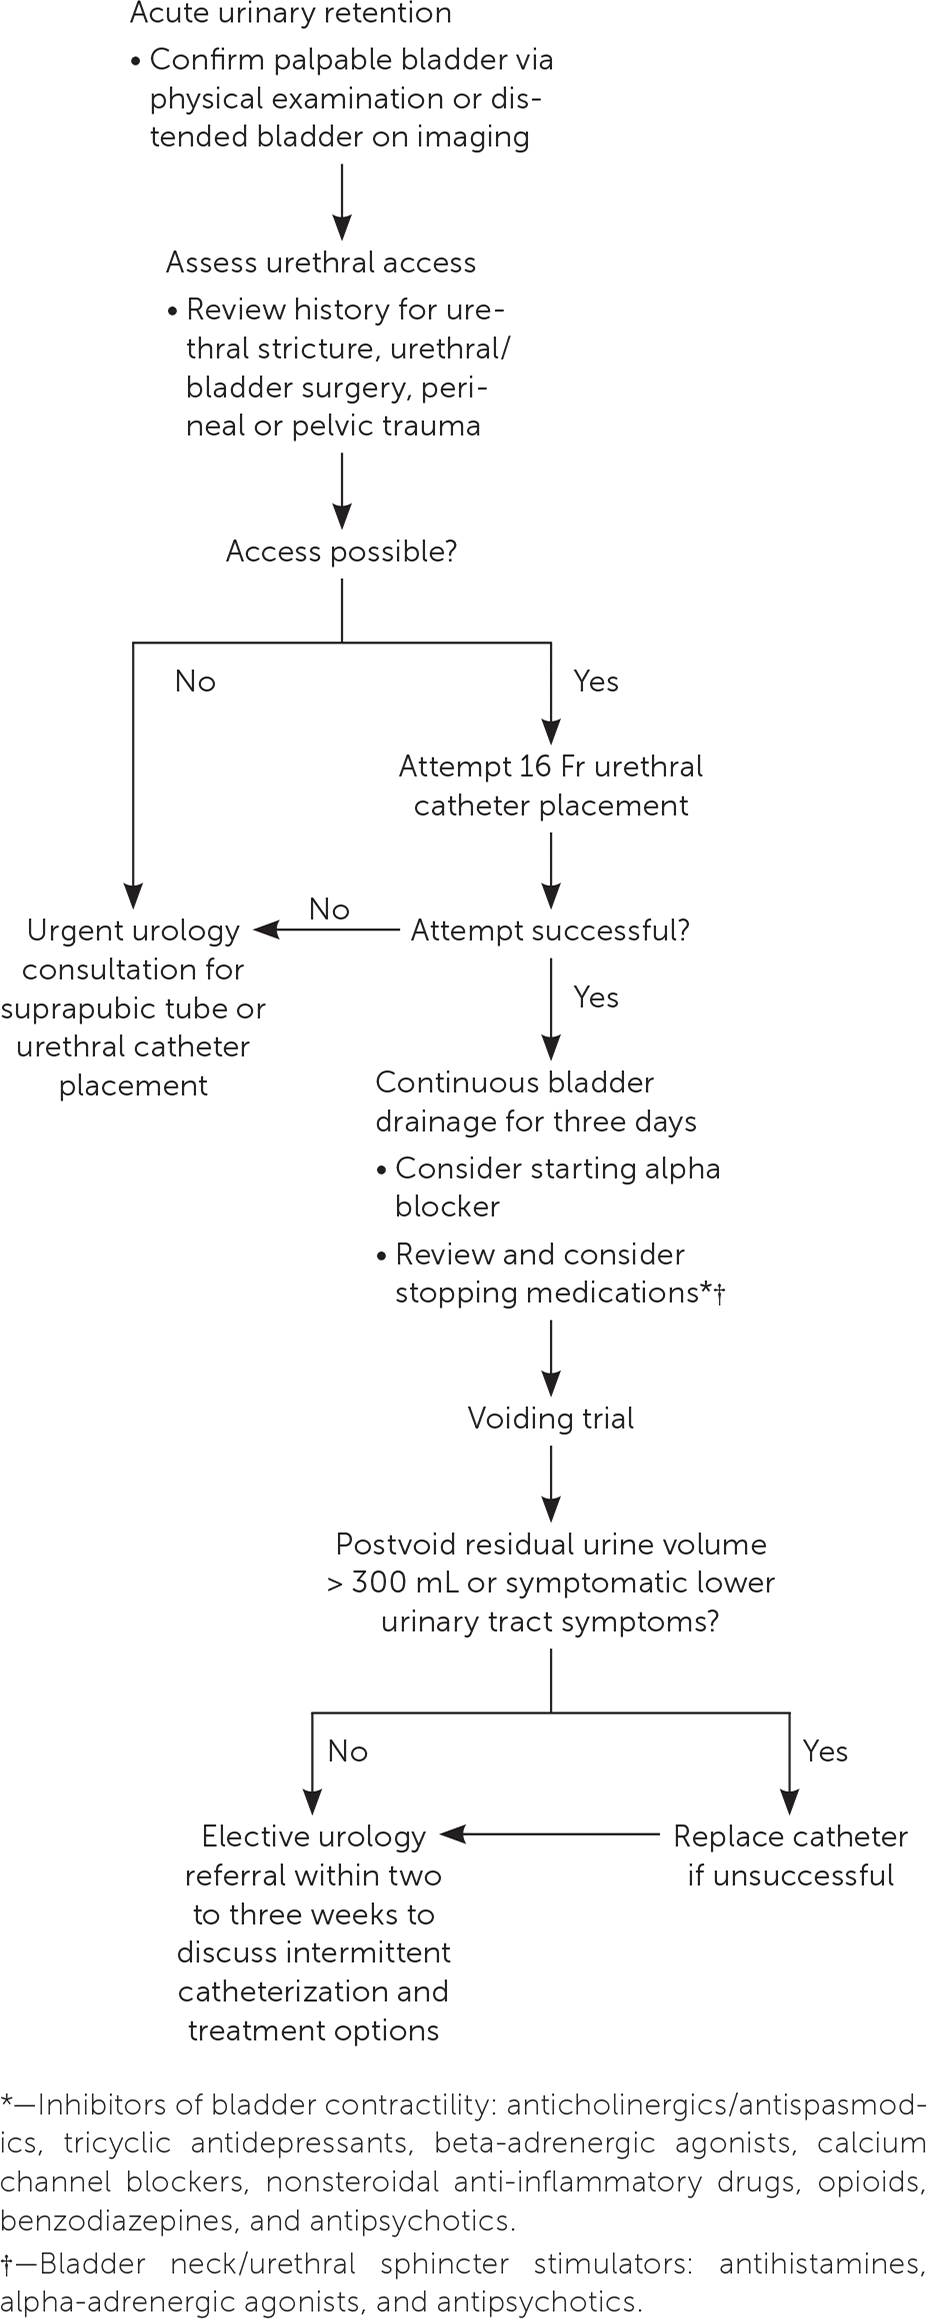 PDF) The risk factors of postpartum urinary retention after vaginal  delivery: A systematic review